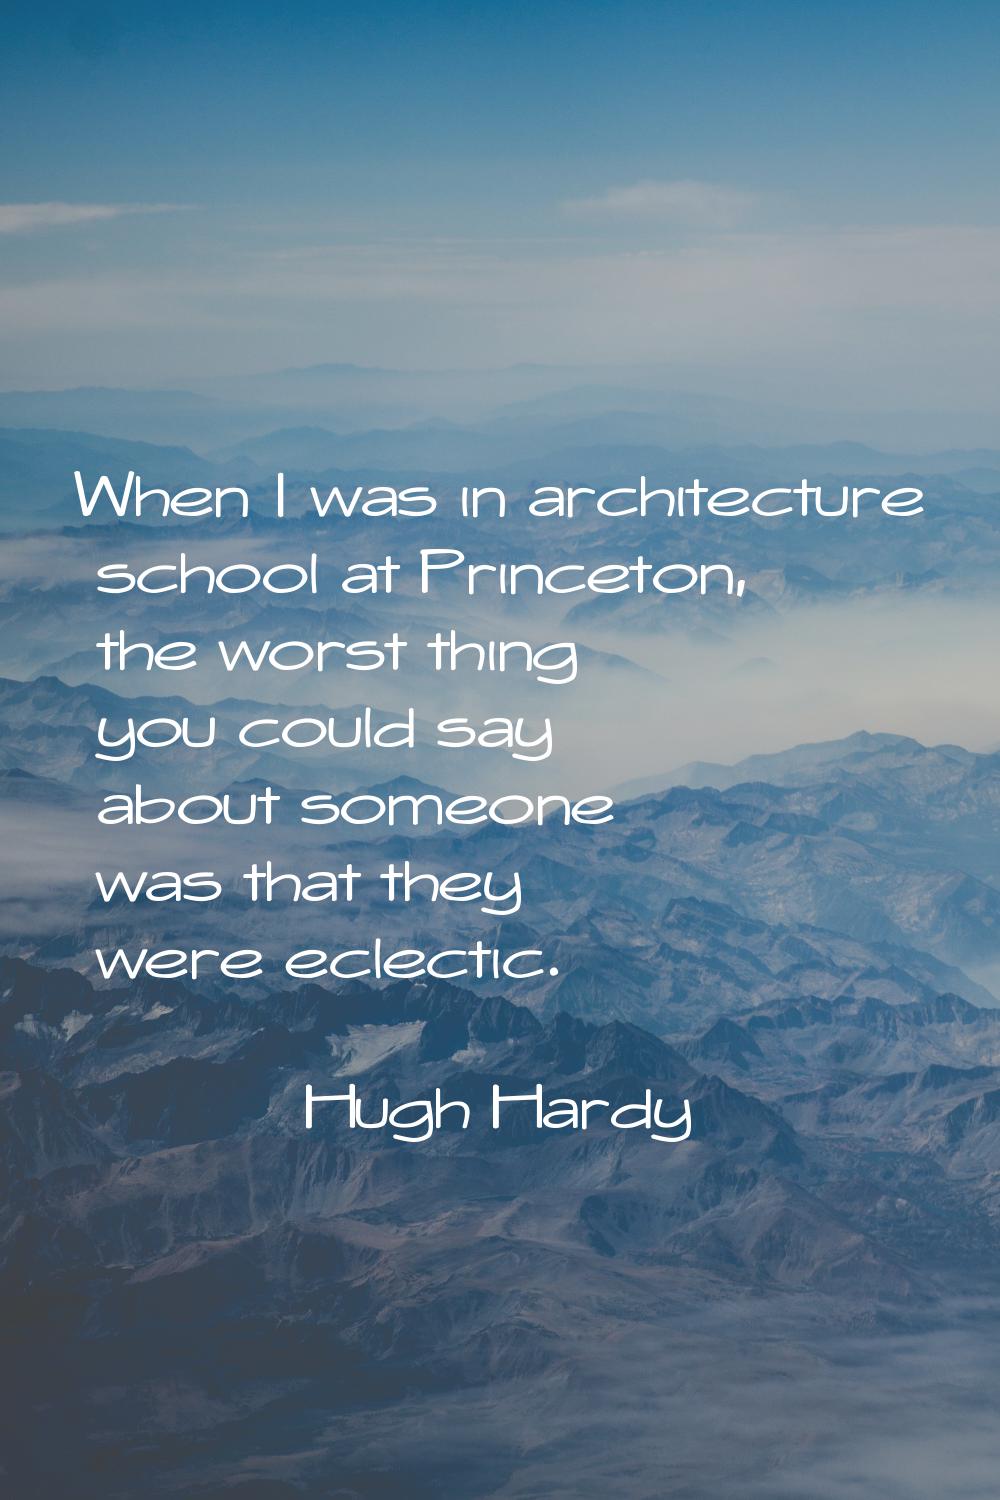 When I was in architecture school at Princeton, the worst thing you could say about someone was tha